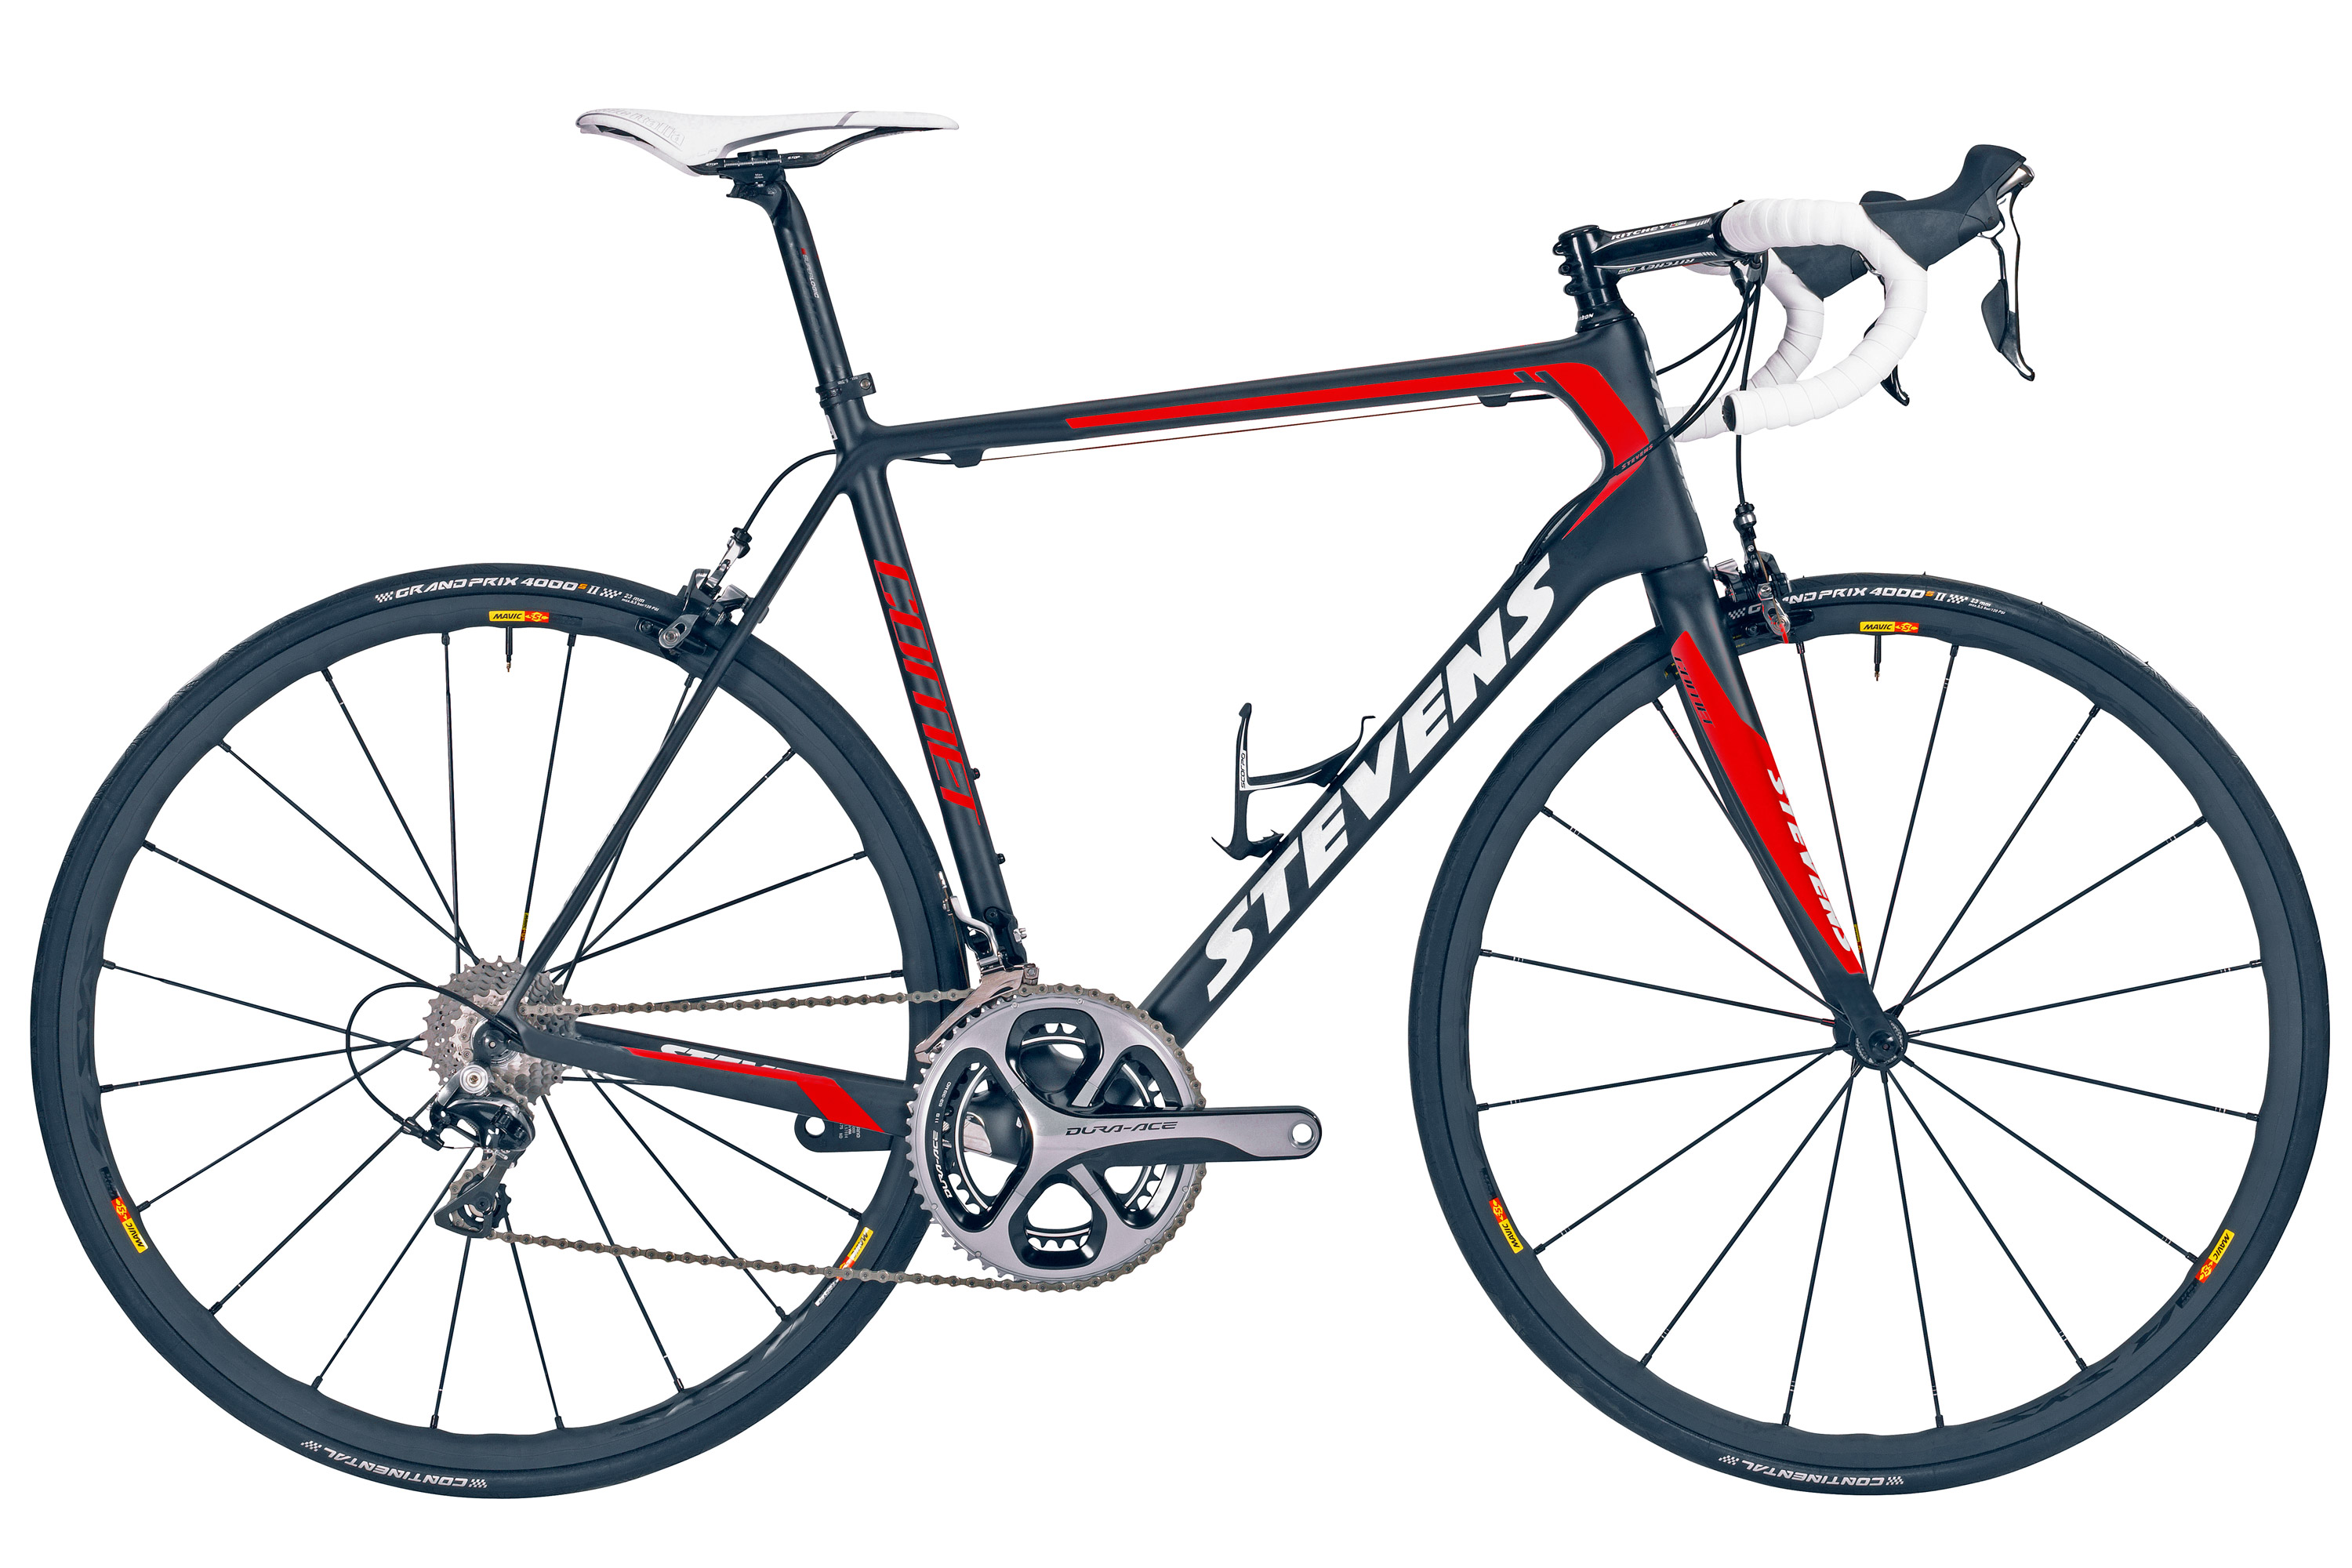 Stevens reshapes lighter, stiffer & cheaper Comet, Comet Disc & Xeon and more road bikes…